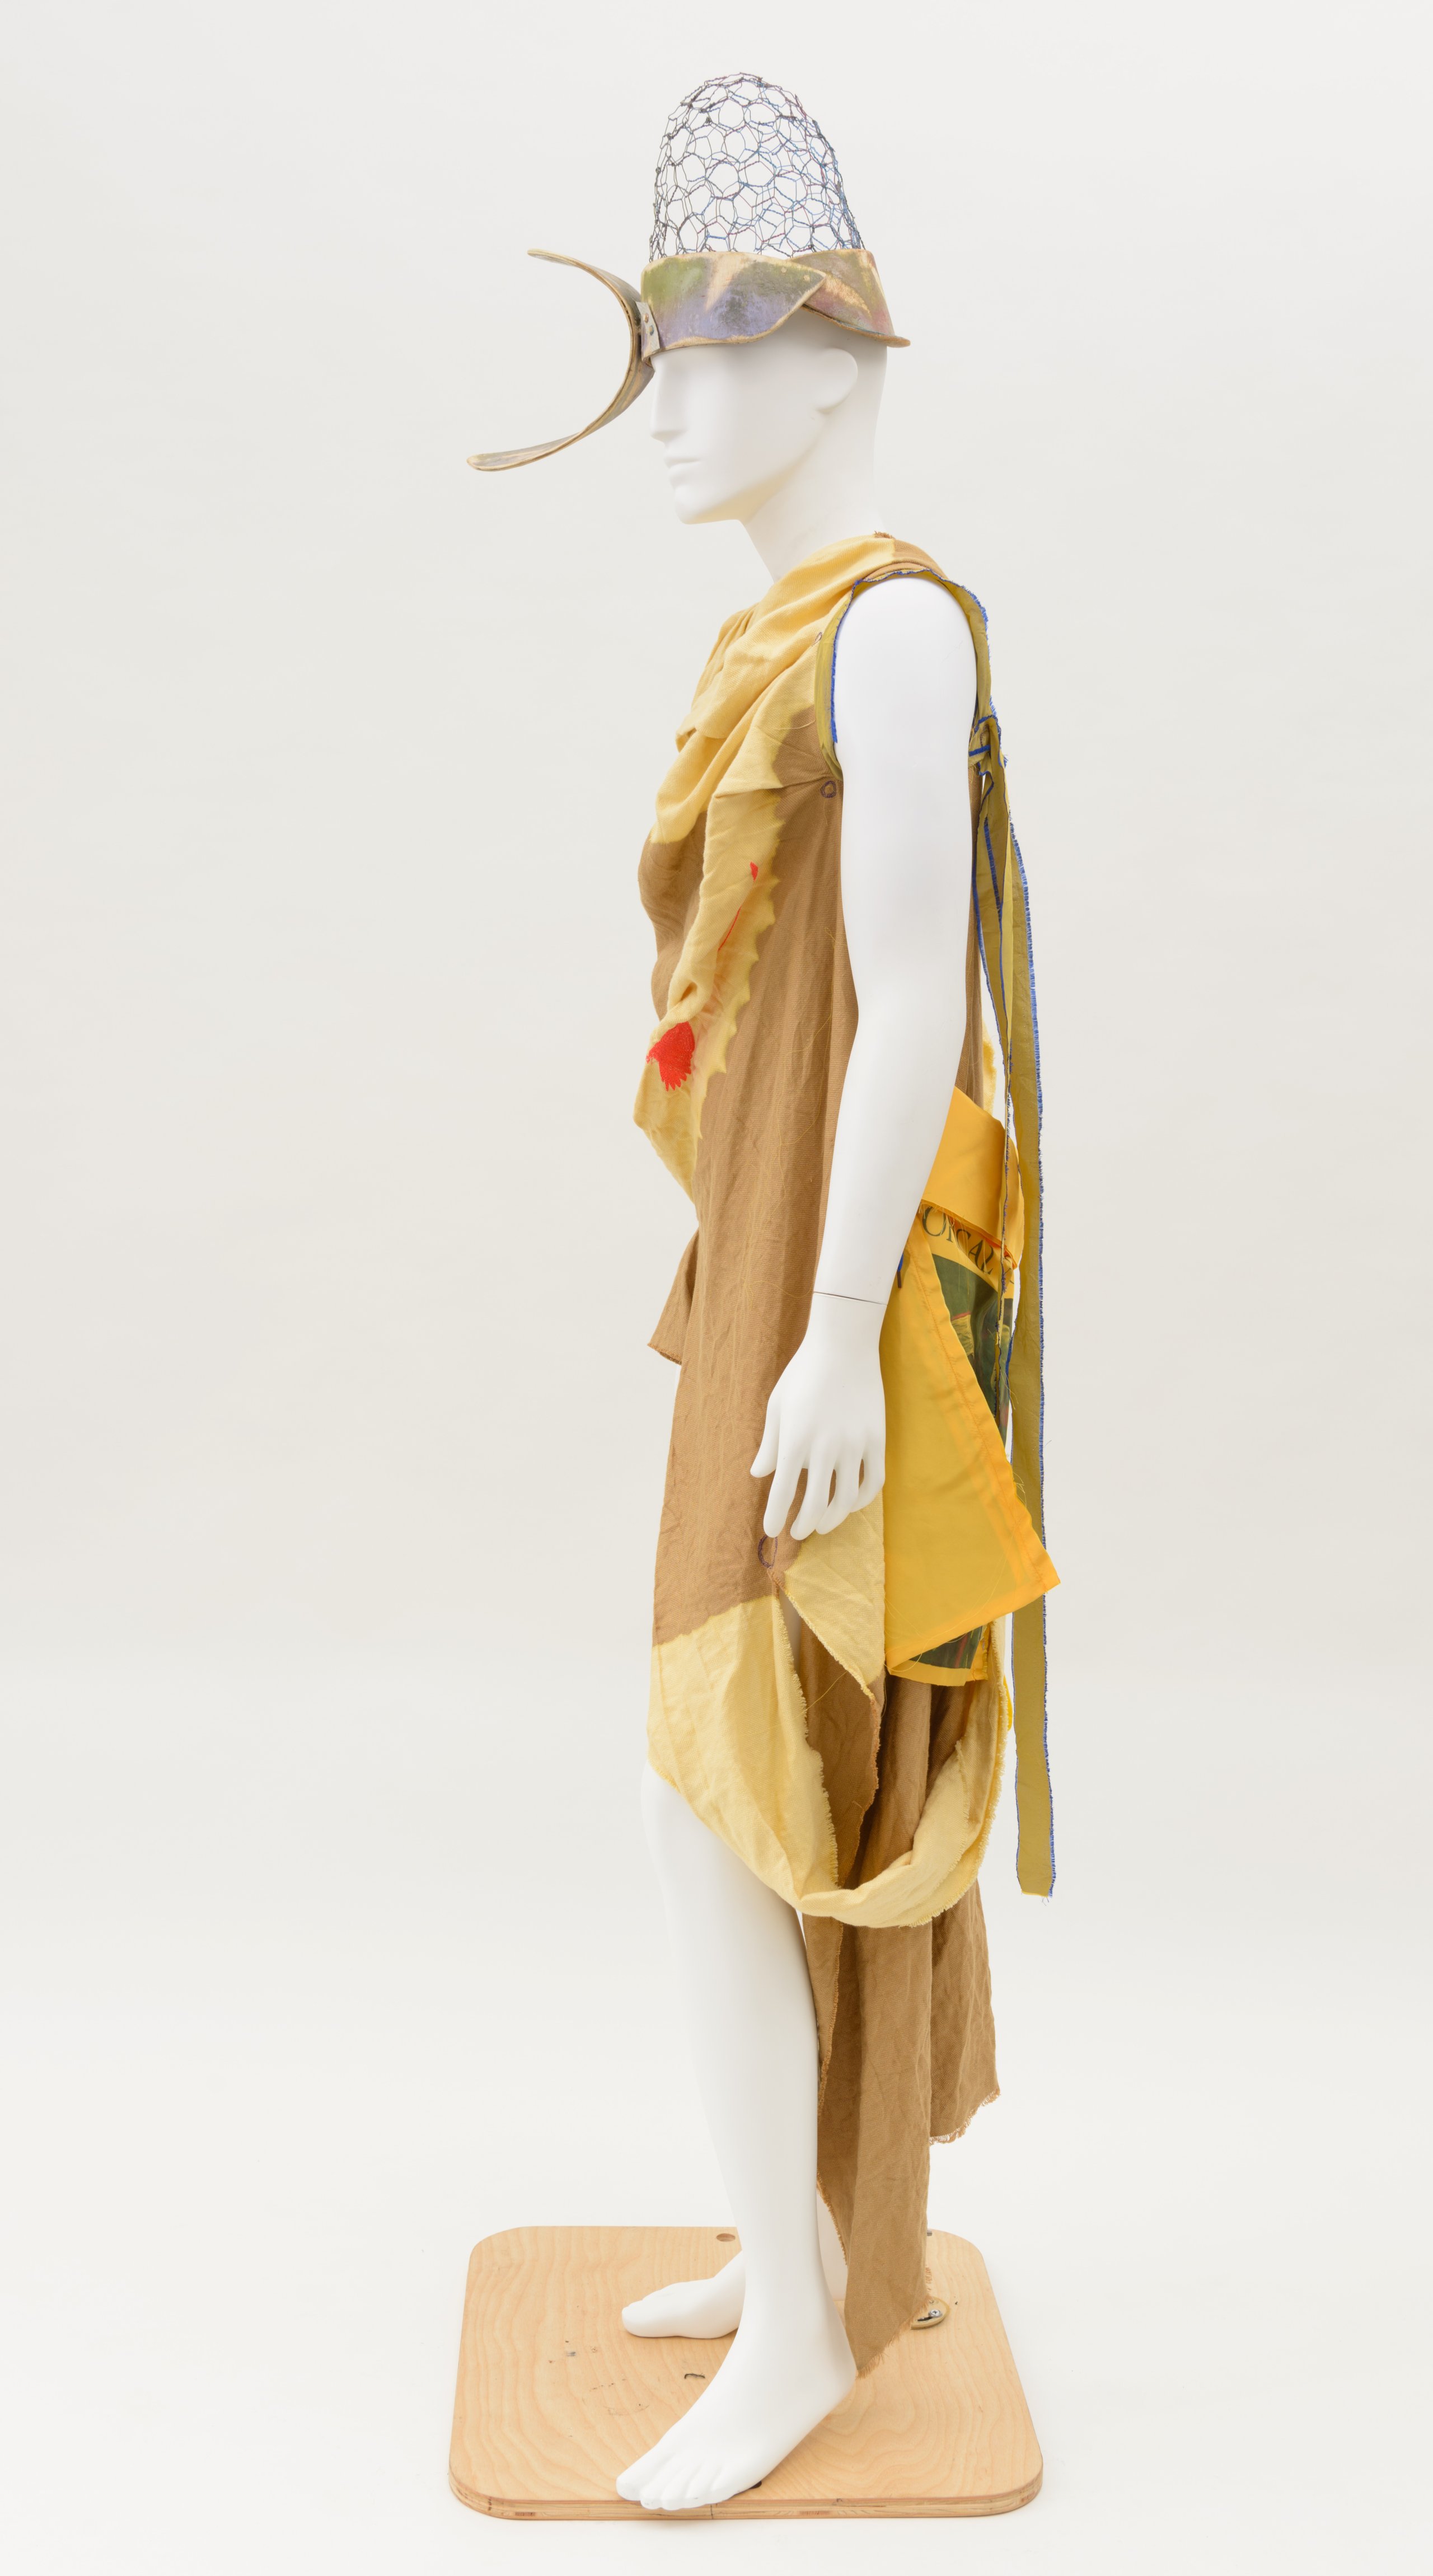 Dress, 'FIGURES IN LANDSCAPE' by Bernhard Willhelm and headpiece by Duane Paul